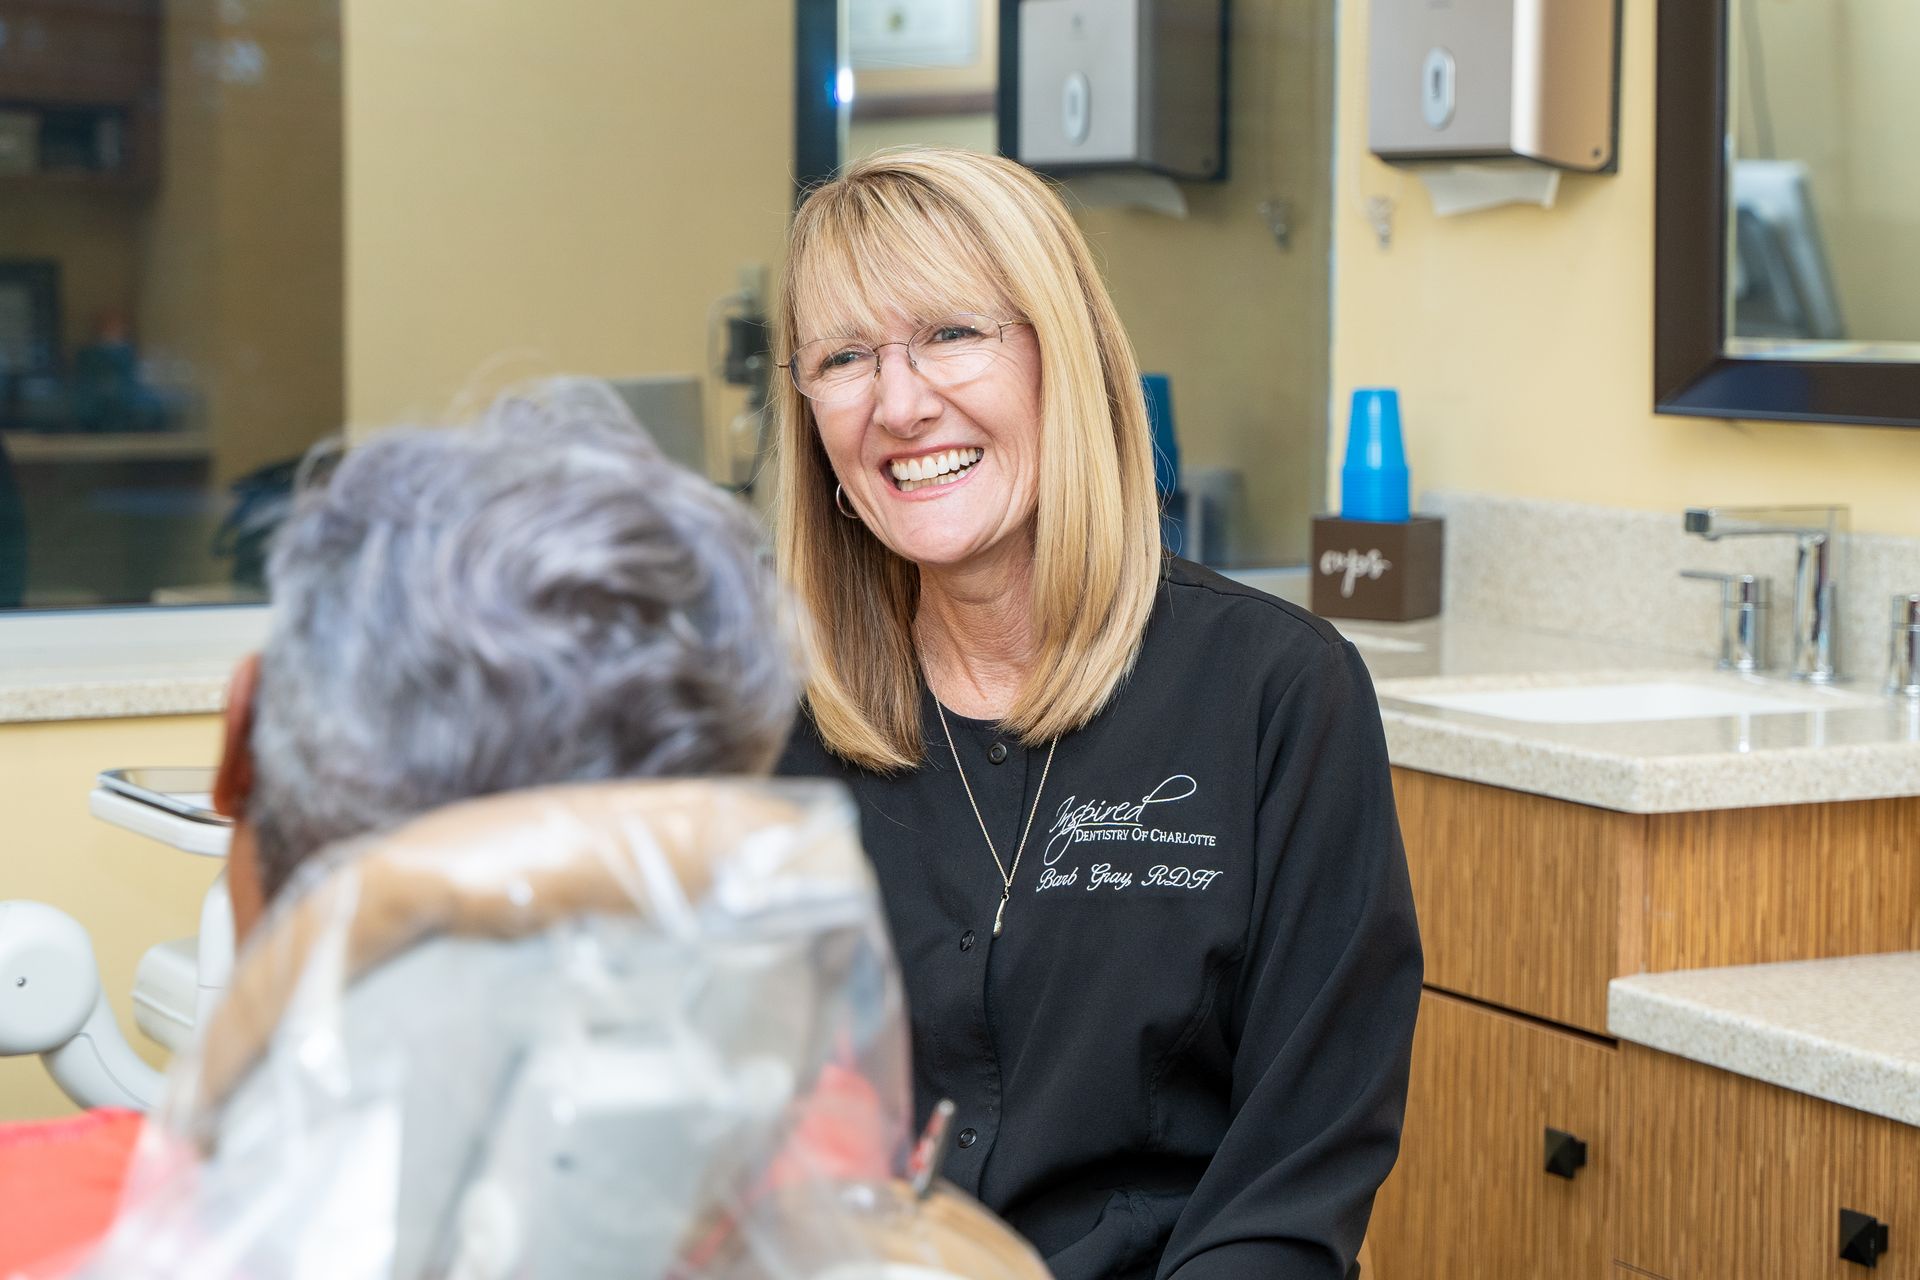 Woman being counseled by dentist about dentures